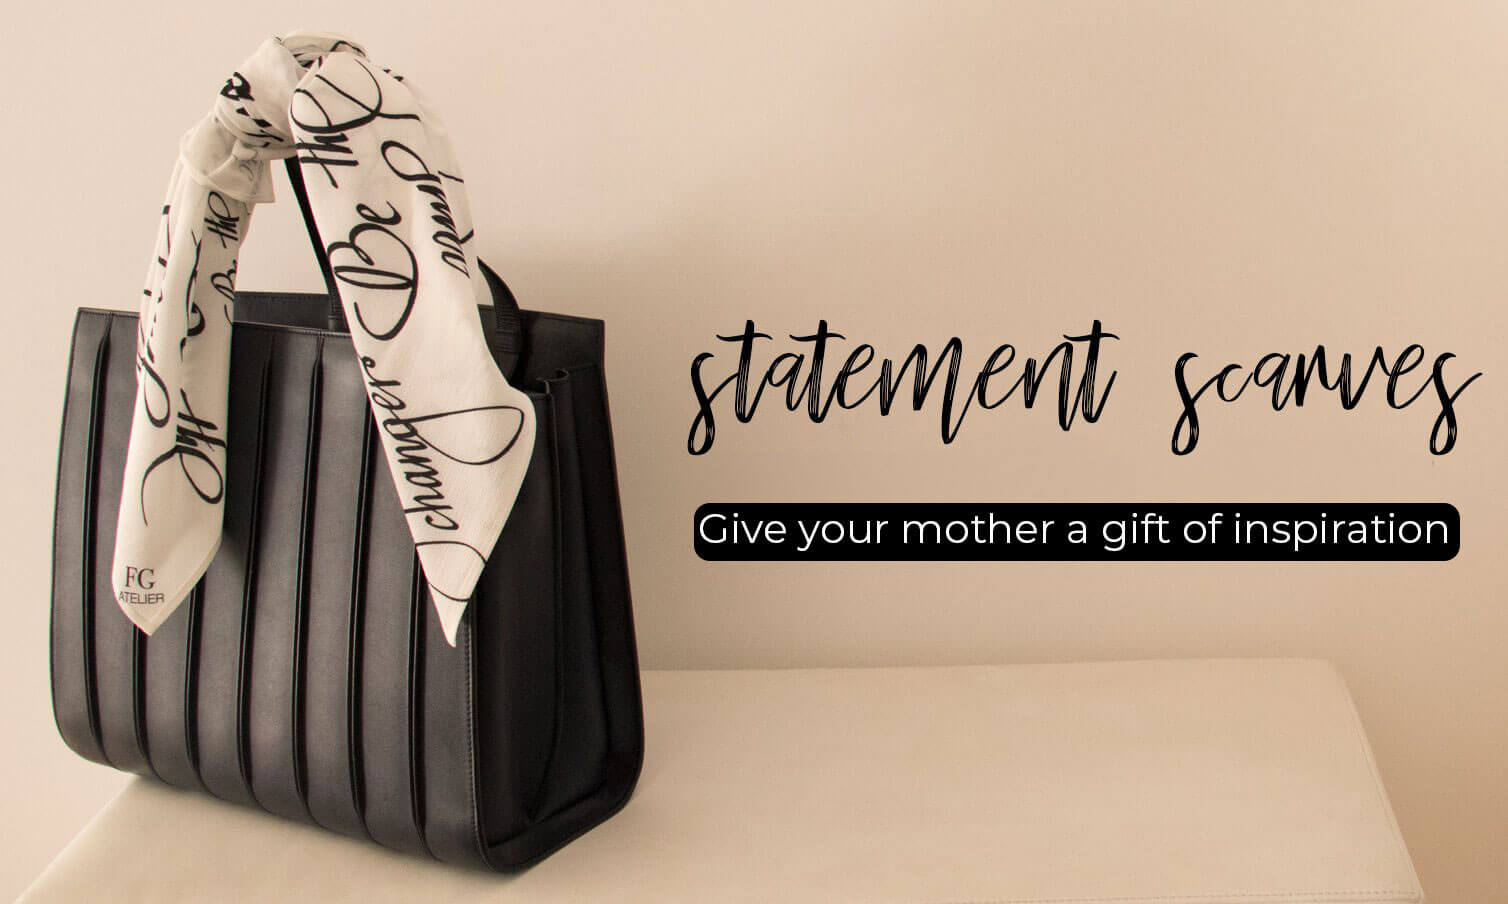 Statement Scarves - The Best Gift For Her